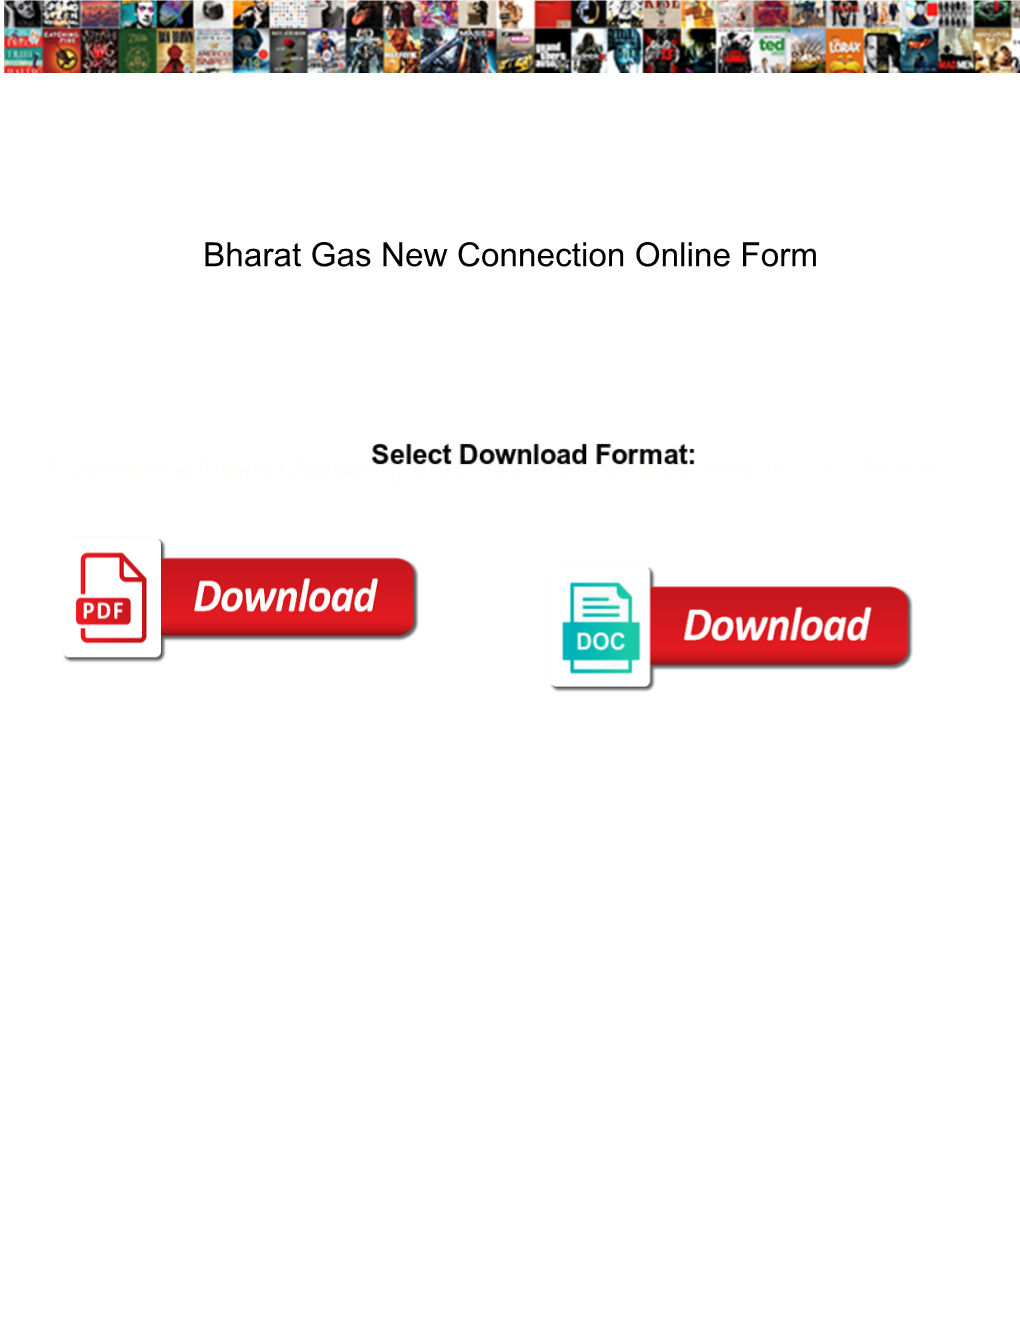 Bharat Gas New Connection Online Form